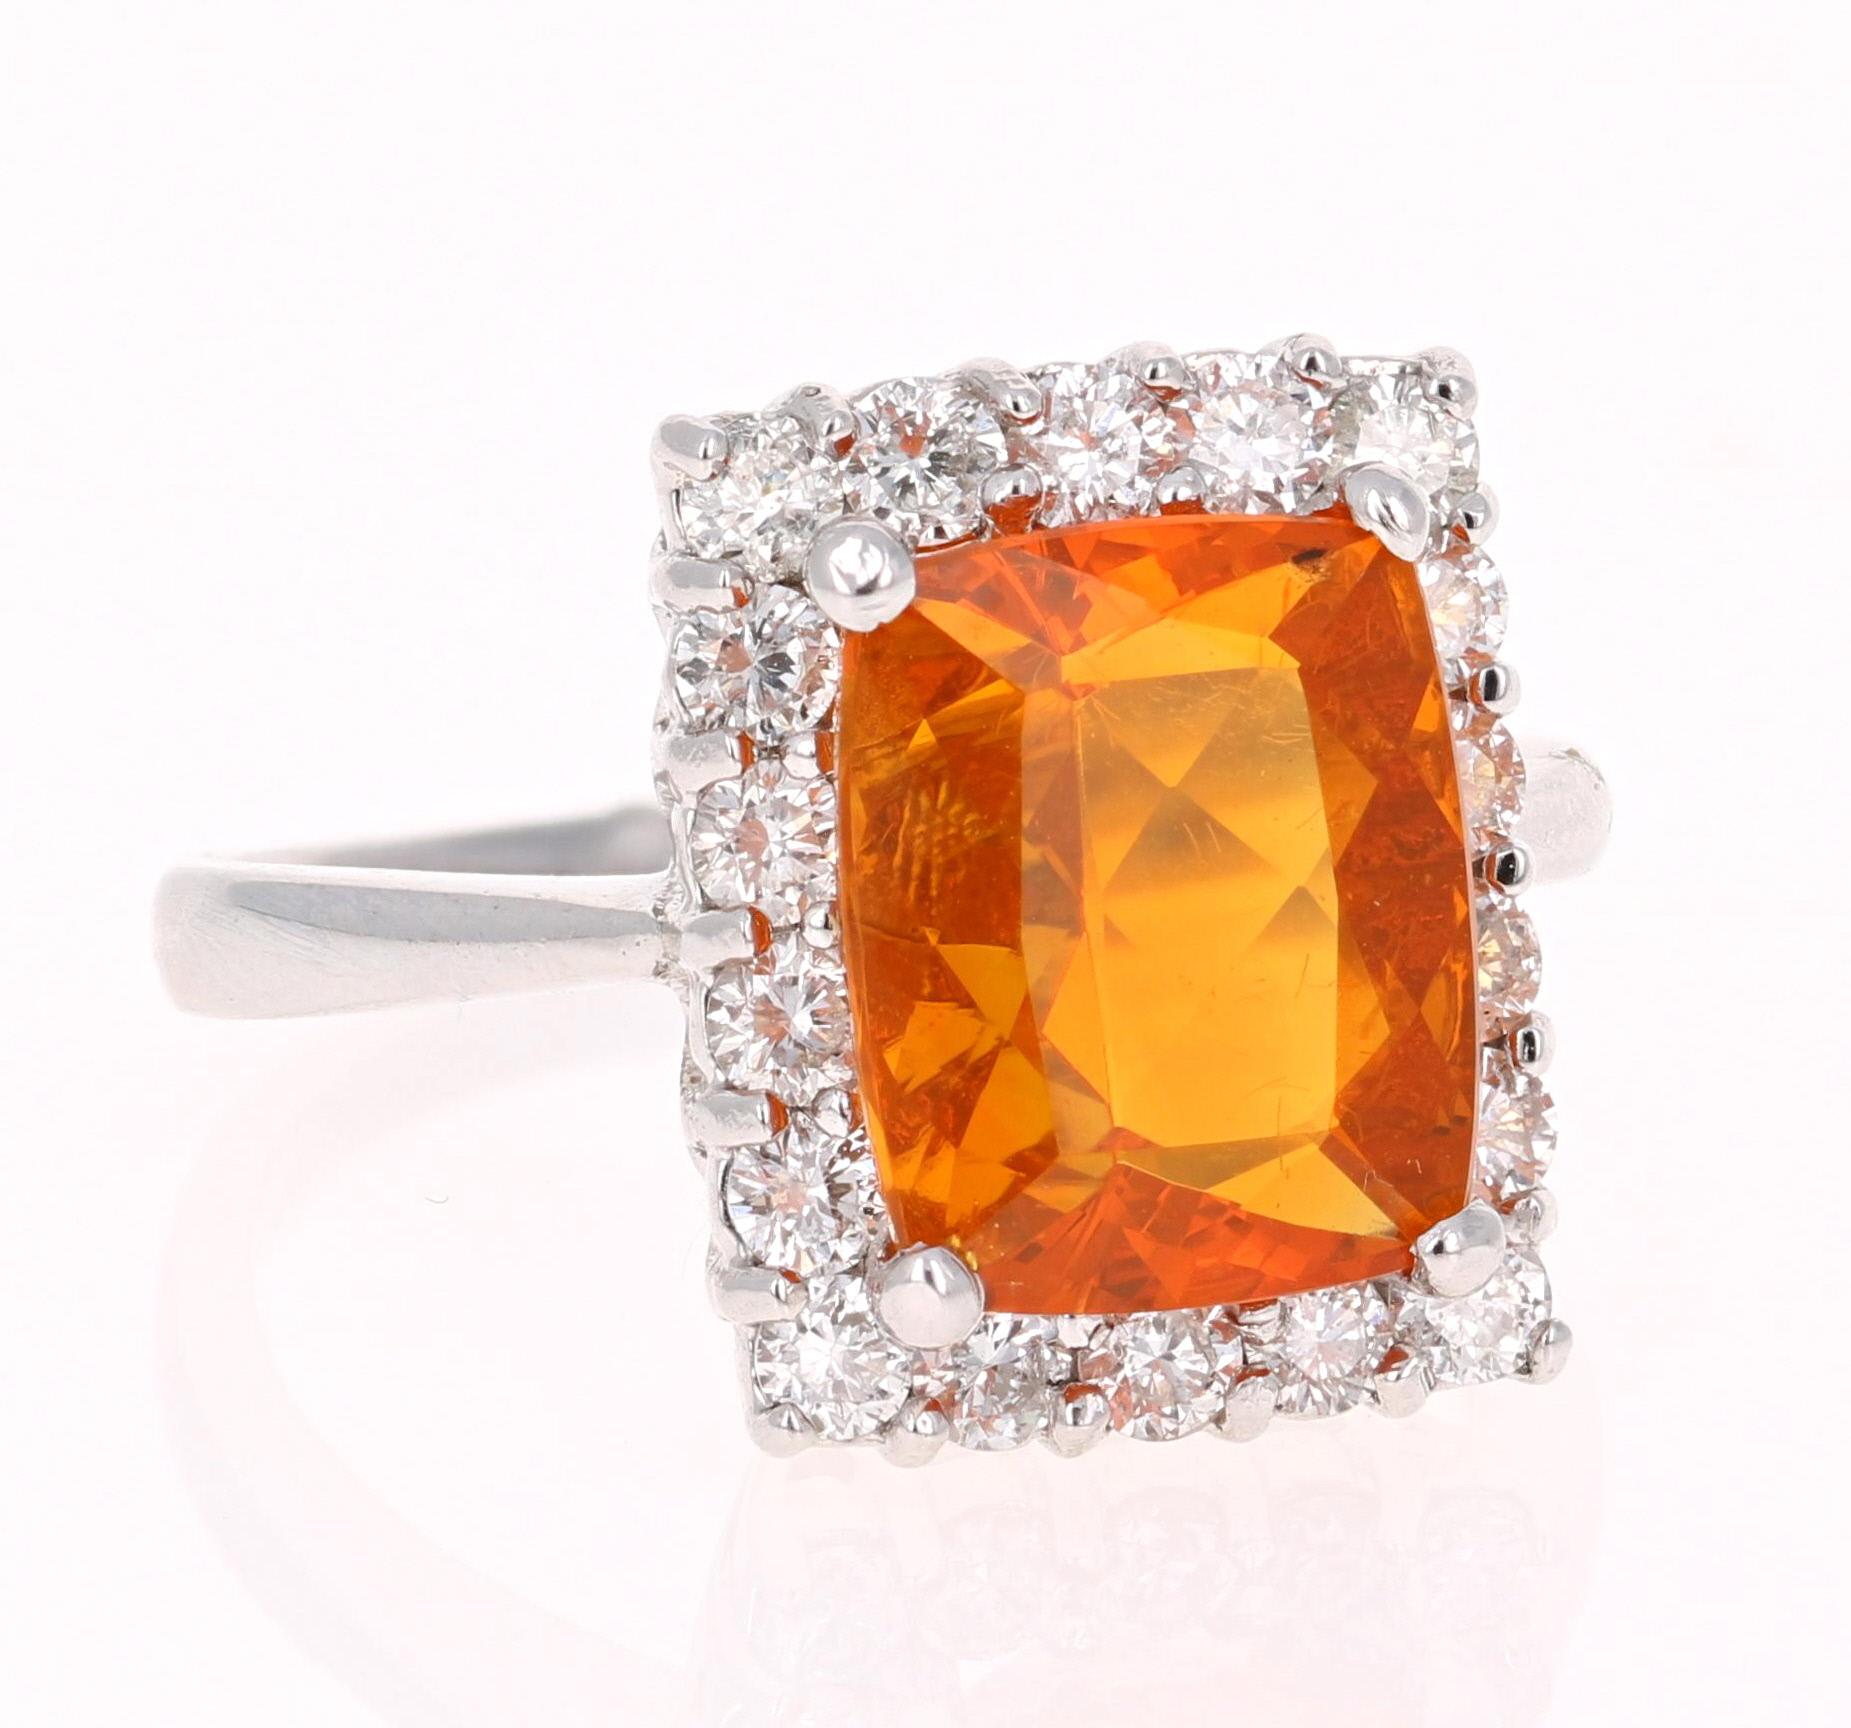 Beautiful Fire Opal and Diamond Ring. This ring has a 3.29 carat Cushion Cut Fire Opal in the center of the ring and is surrounded by a halo of 18 Round Cut Diamonds that weigh a total of 0.95 carat.  The total carat weight of the ring is 4.24